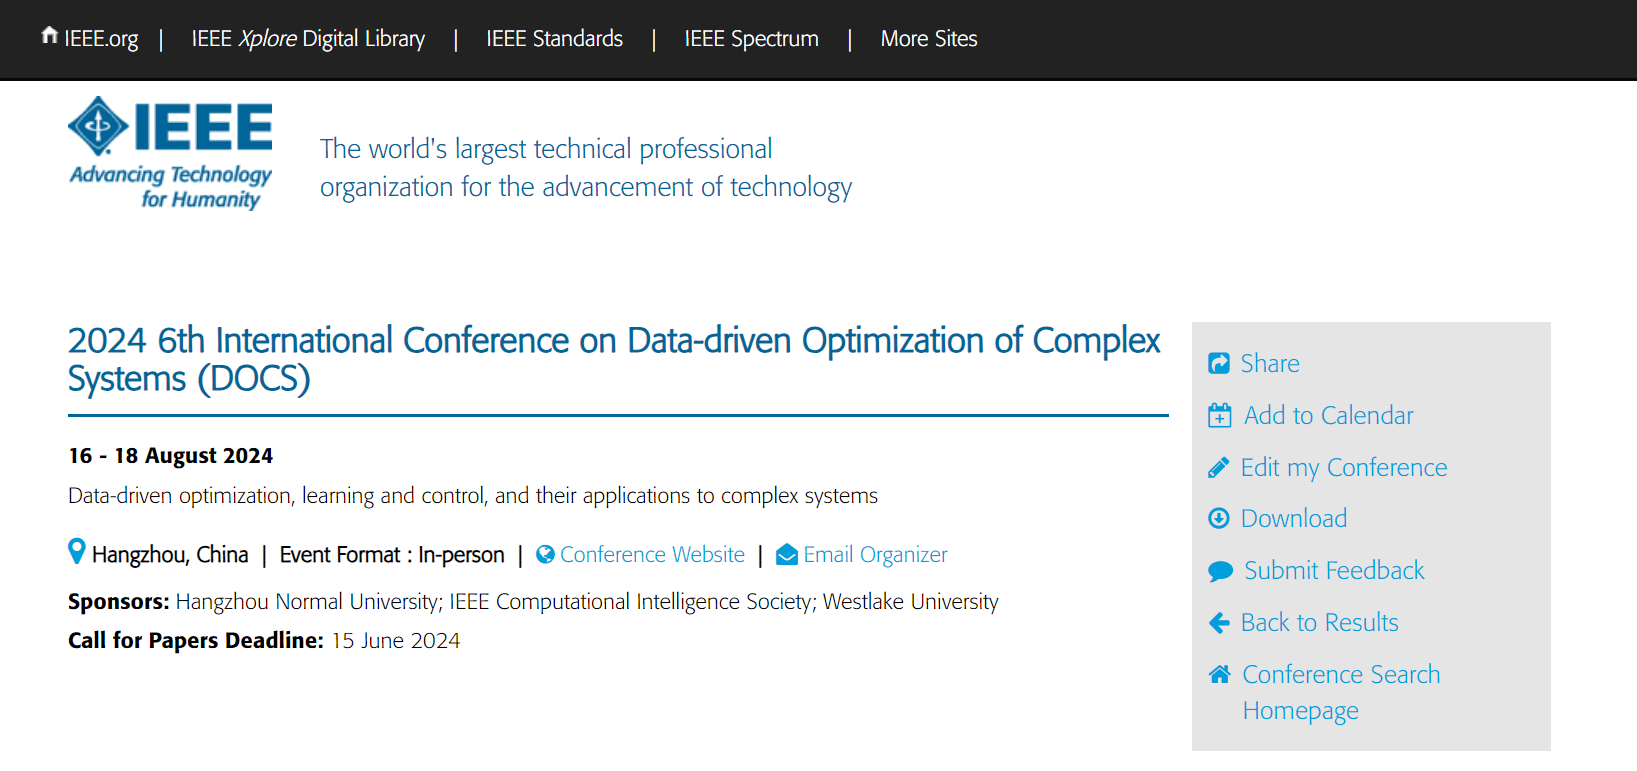 IEEE 2024 6th International Conference on Data-driven Optimization of Complex Systems (DOCS 2024)